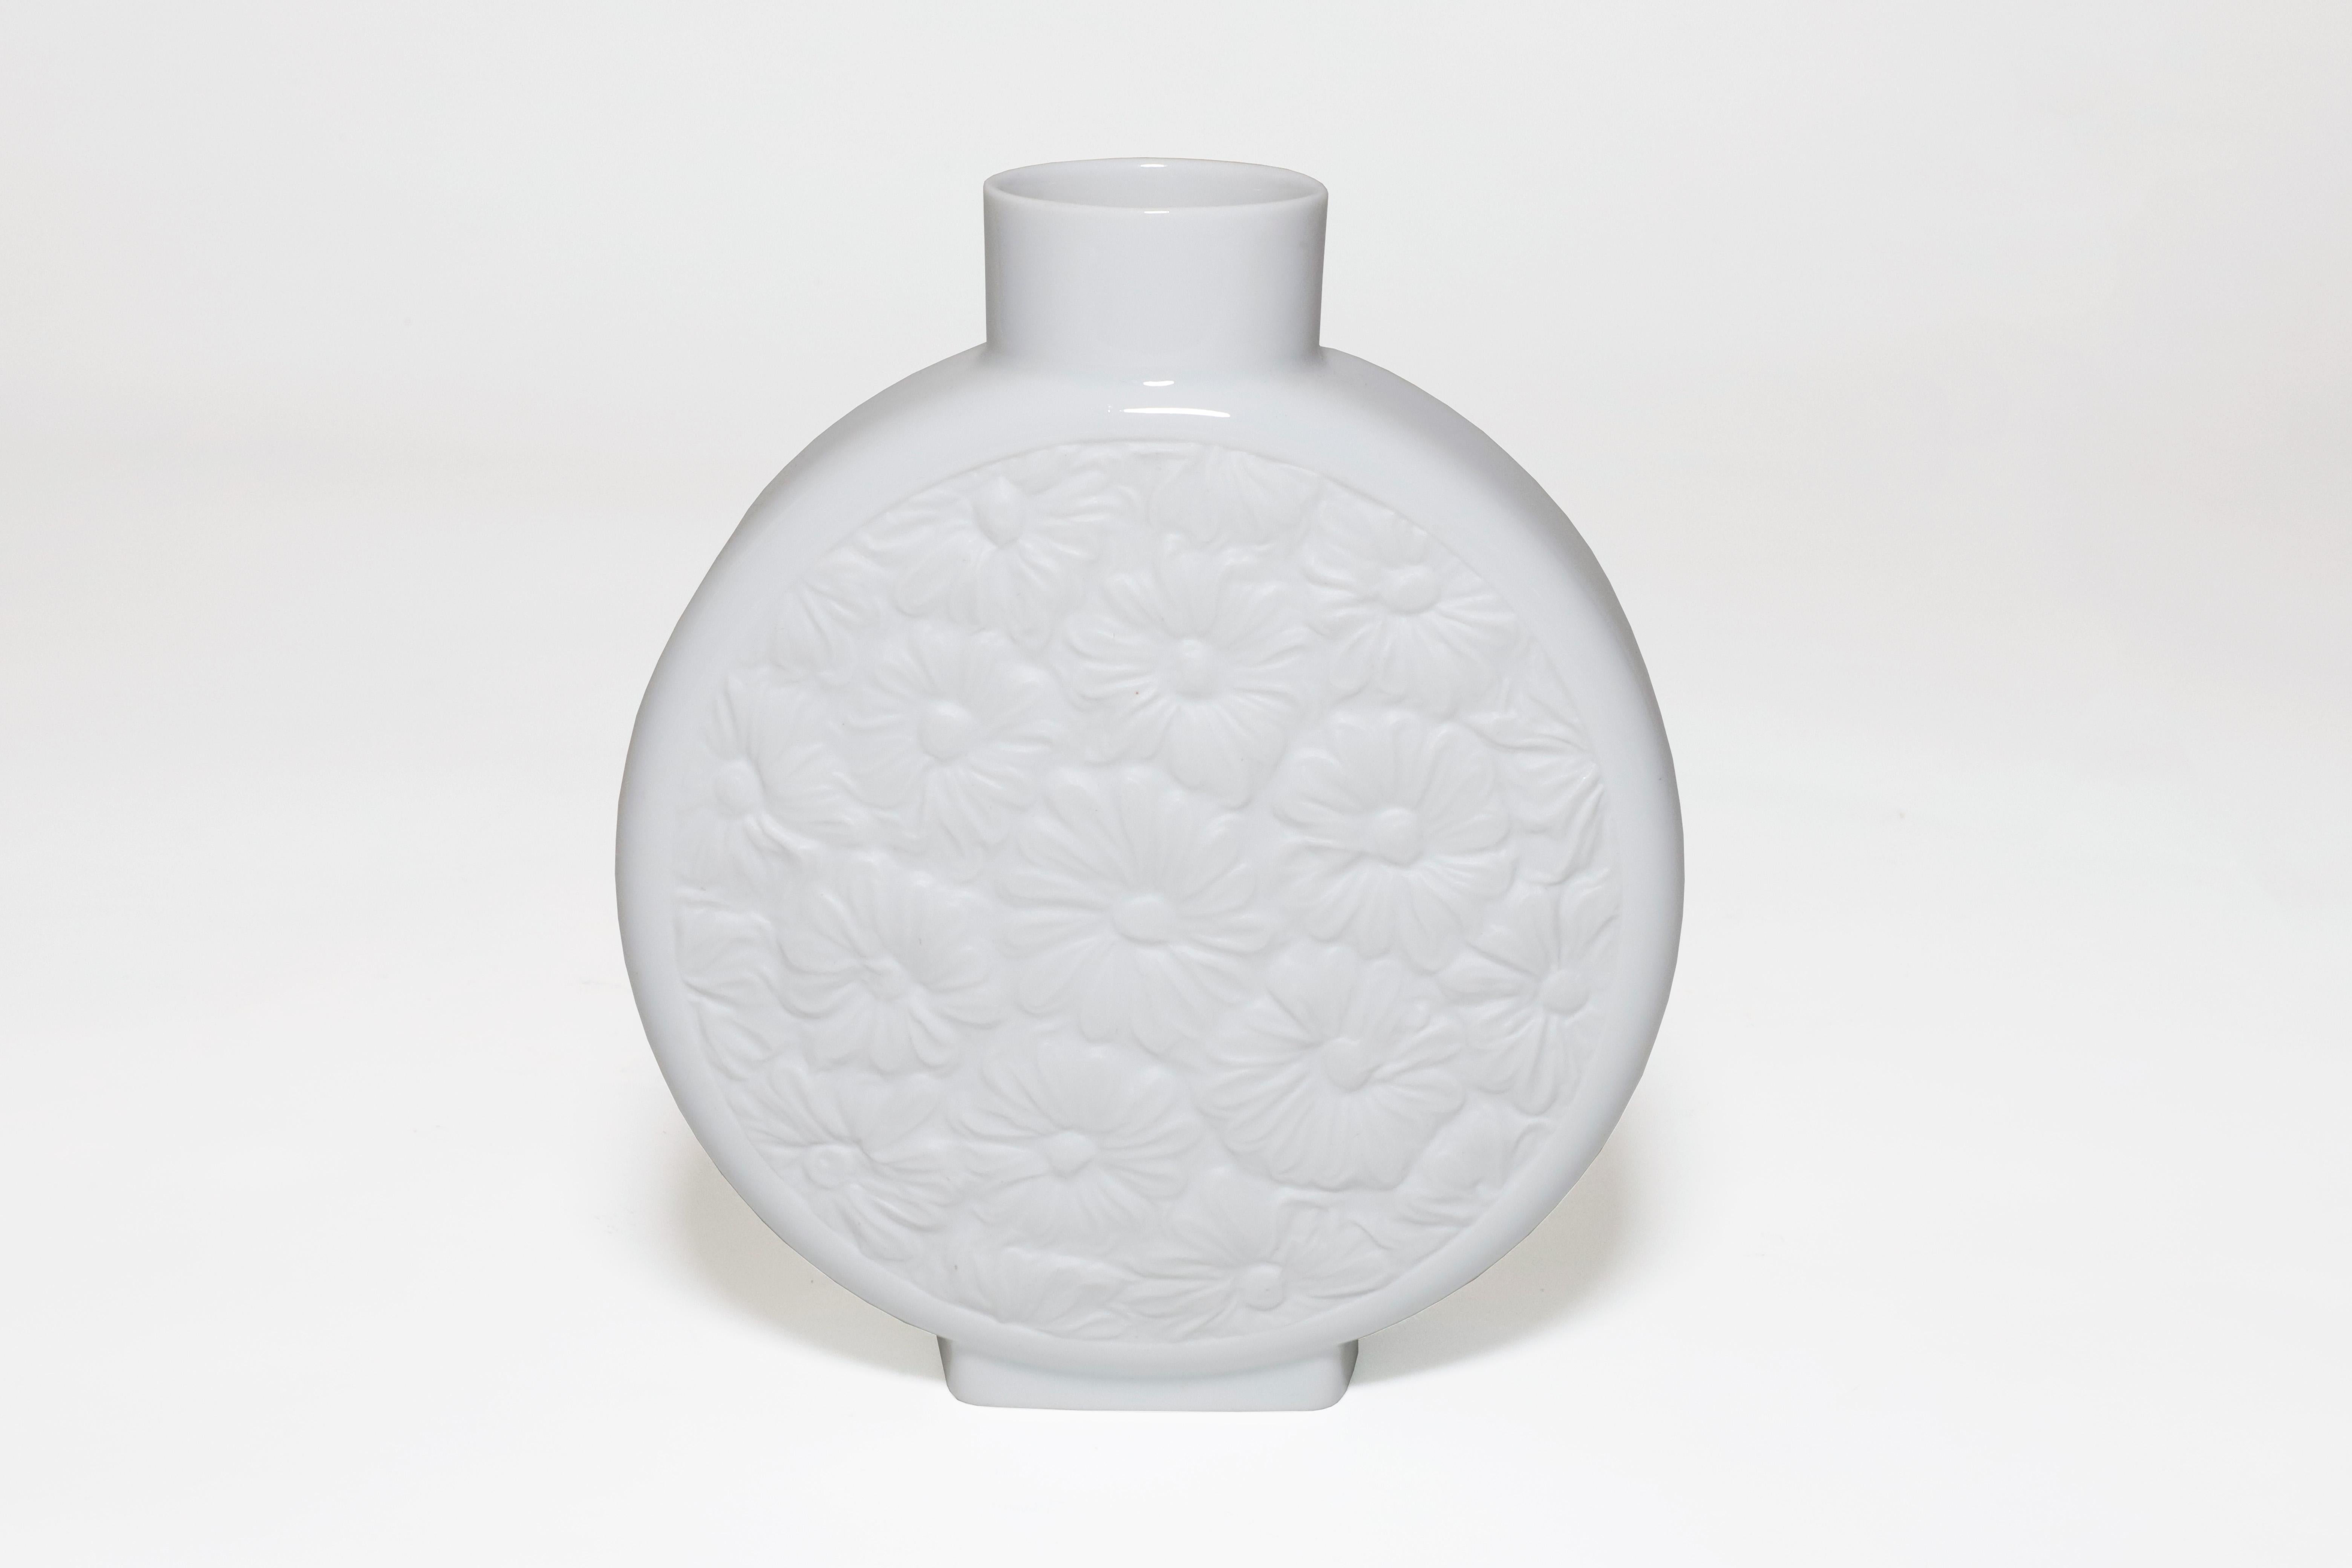 Slender white porcelain vase by Krautheim Selb Barvaria. Mate flower design on each face with a glossy white glaze around the rest of the vase. Stamped on the bottom. Made in Germany in the mid 20th century. 

Property from esteemed interior